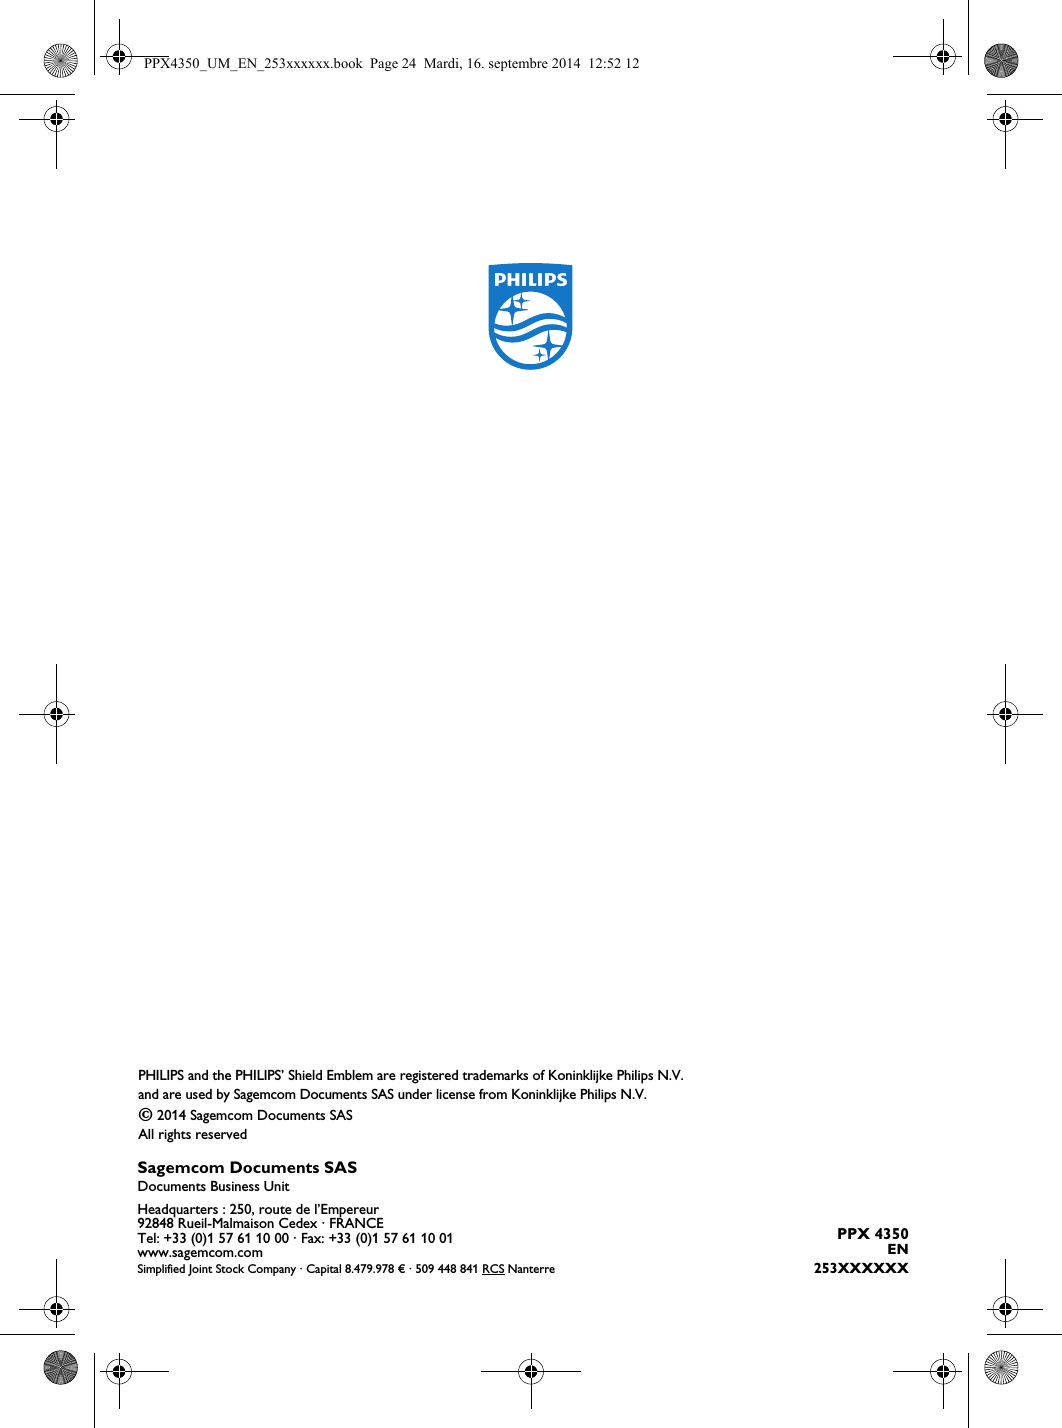 PPX 4350EN253XXXXXXPHILIPS and the PHILIPS’ Shield Emblem are registered trademarks of Koninklijke Philips N.V.  and are used by Sagemcom Documents SAS under license from Koninklijke Philips N.V.È 2014 Sagemcom Documents SASAll rights reservedSagemcom Documents SASDocuments Business UnitHeadquarters : 250, route de l’Empereur92848 Rueil-Malmaison Cedex · FRANCETel: +33 (0)1 57 61 10 00 · Fax: +33 (0)1 57 61 10 01www.sagemcom.comSimplified Joint Stock Company · Capital 8.479.978 € · 509 448 841 RCS NanterrePPX4350_UM_EN_253xxxxxx.book  Page 24  Mardi, 16. septembre 2014  12:52 12